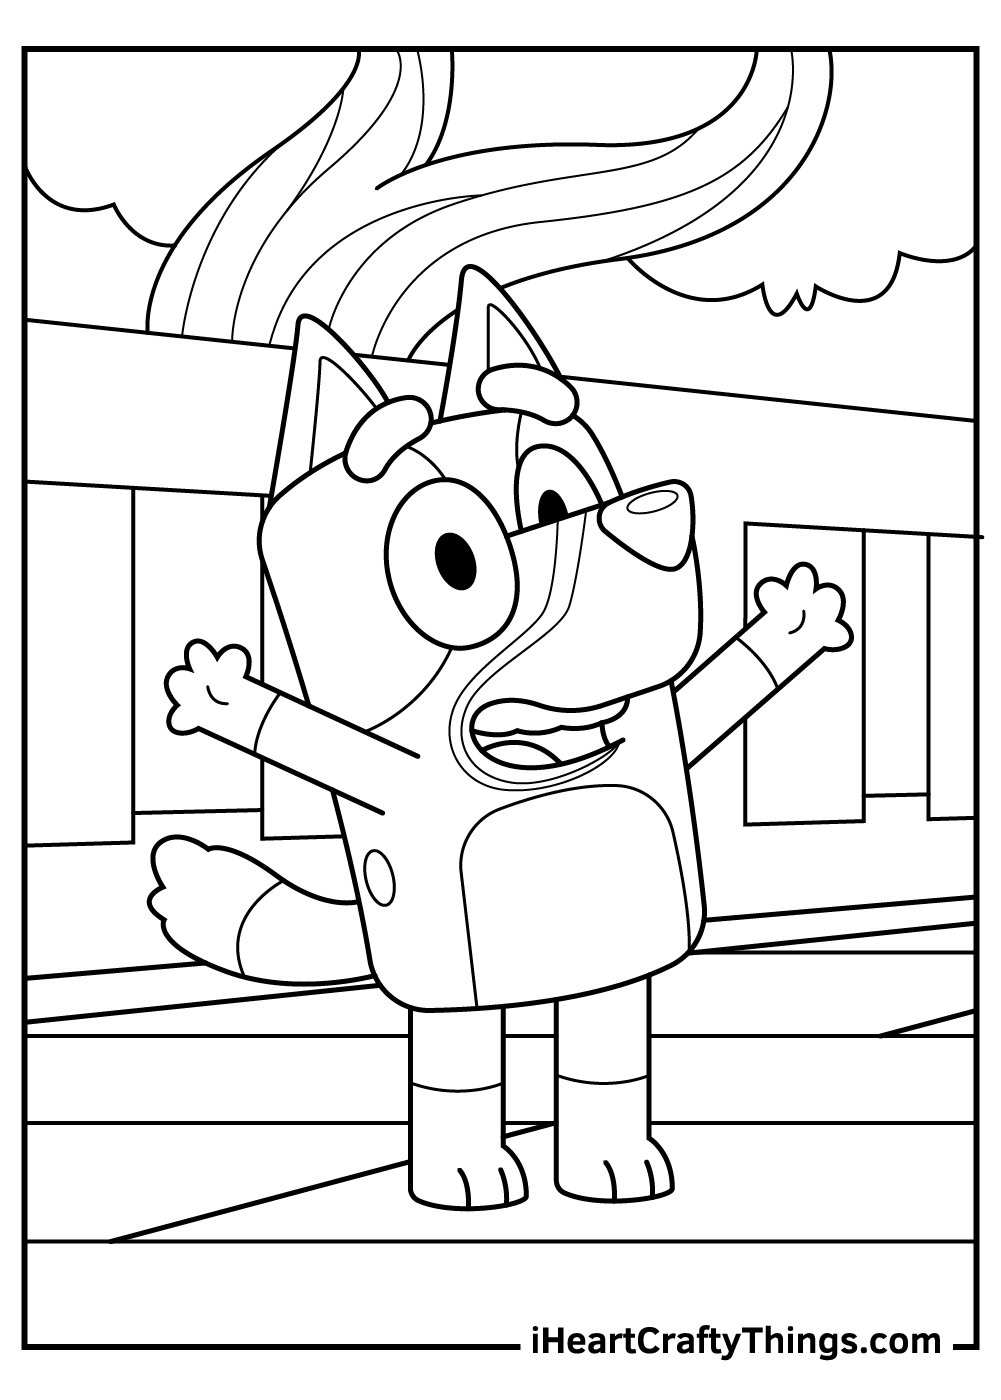 Bluey Coloring Pages (Updated 2021)